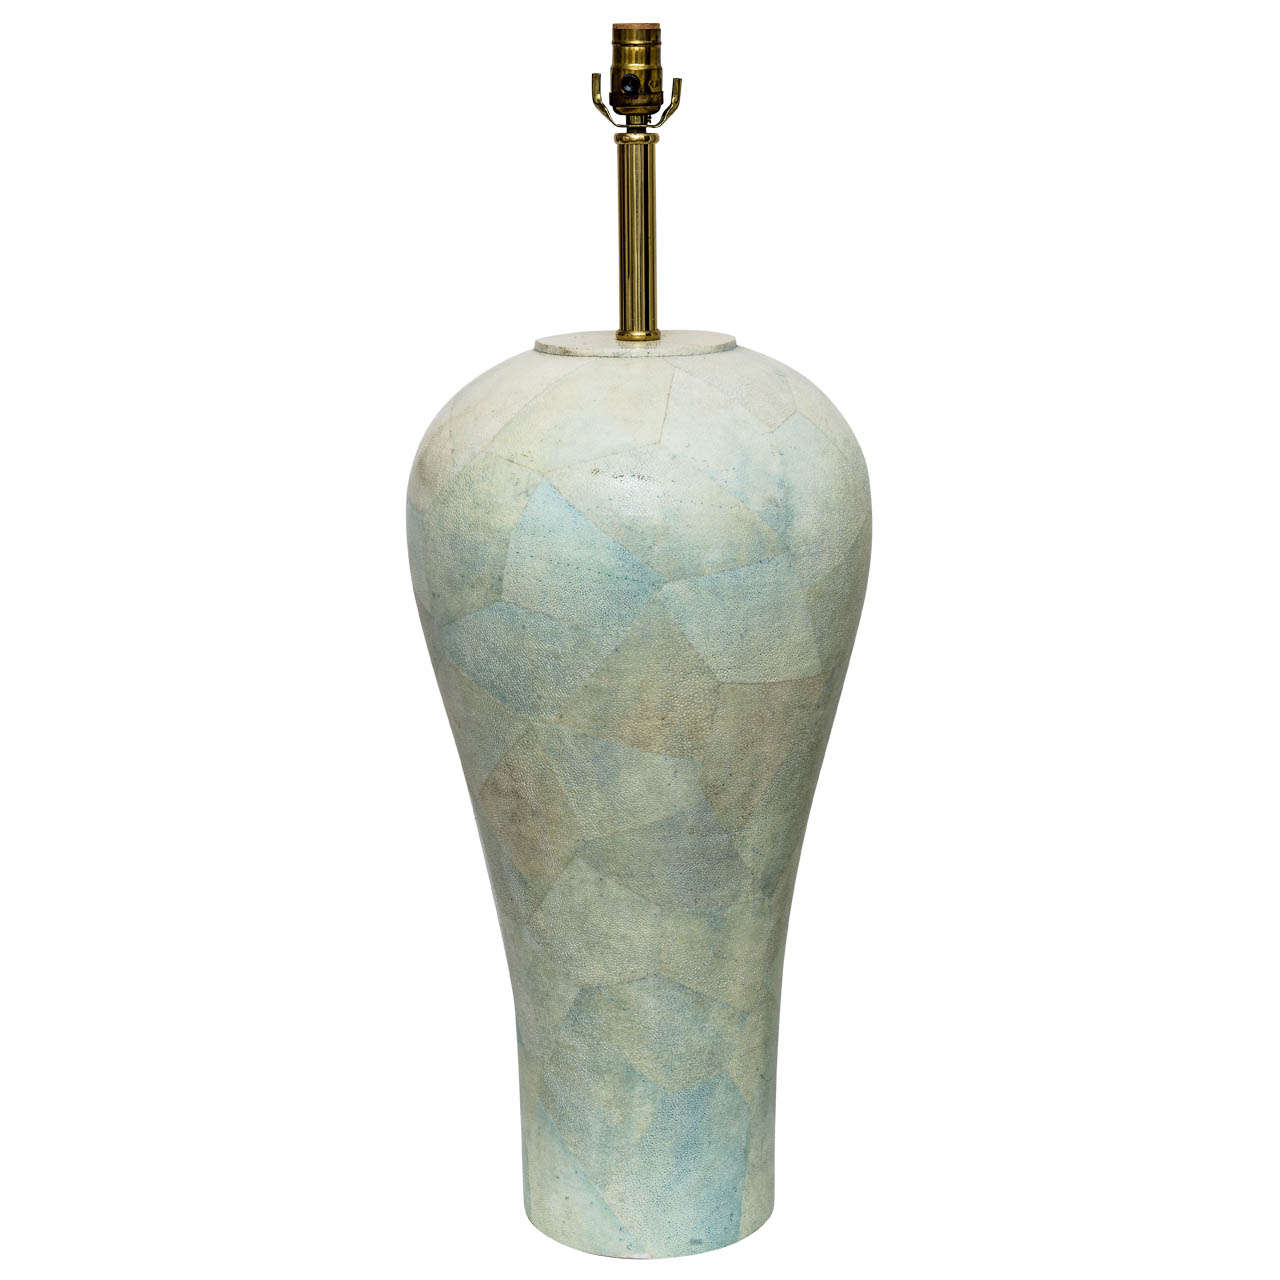 Large-Scale Maitland-Smith Table Lamp in Shagreen and Polished Brass